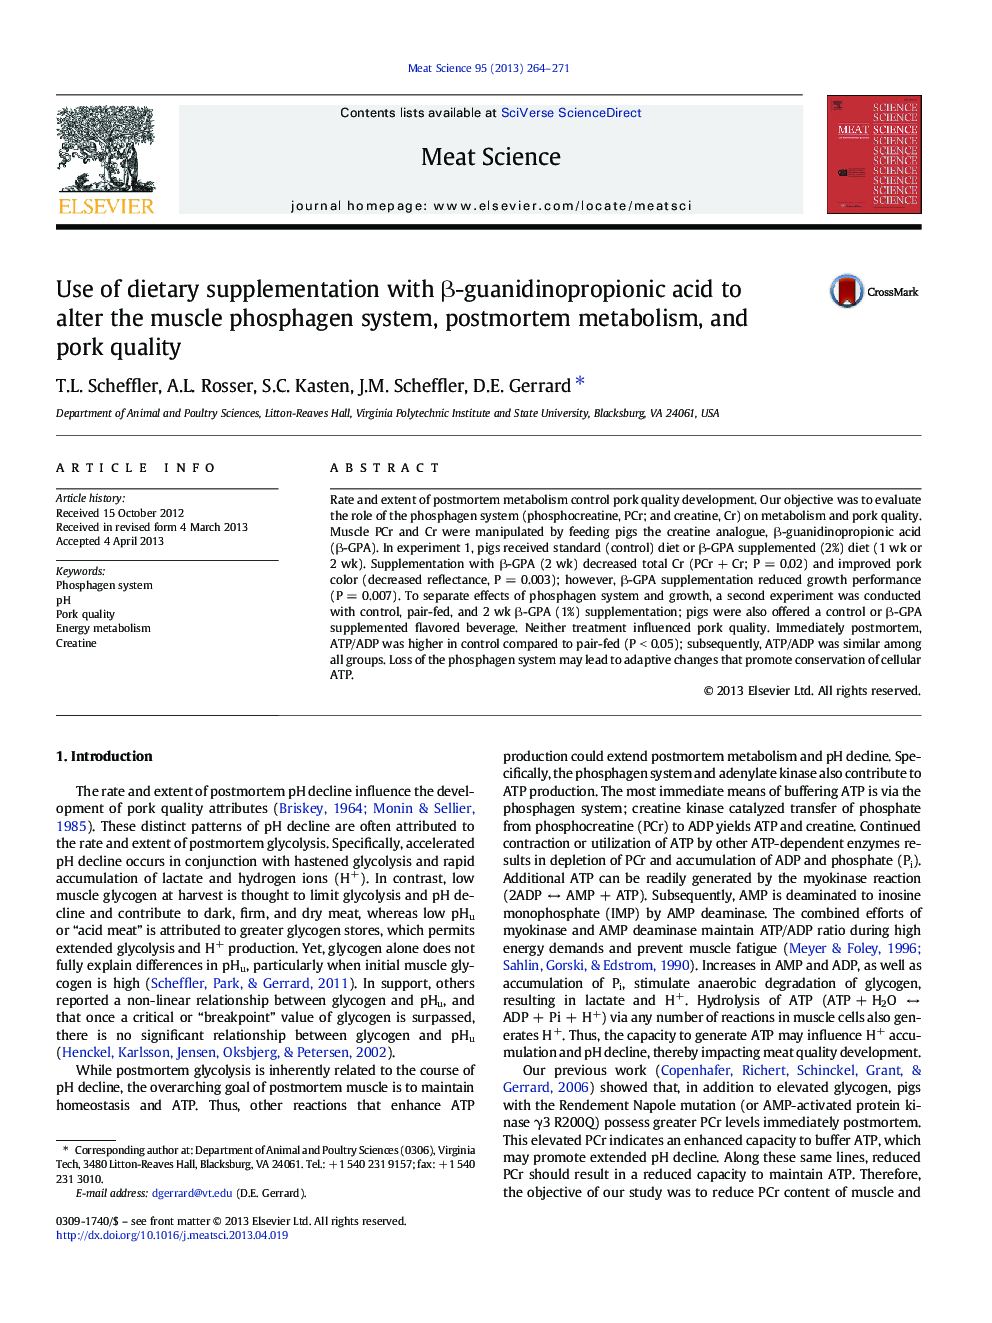 Use of dietary supplementation with Î²-guanidinopropionic acid to alter the muscle phosphagen system, postmortem metabolism, and pork quality